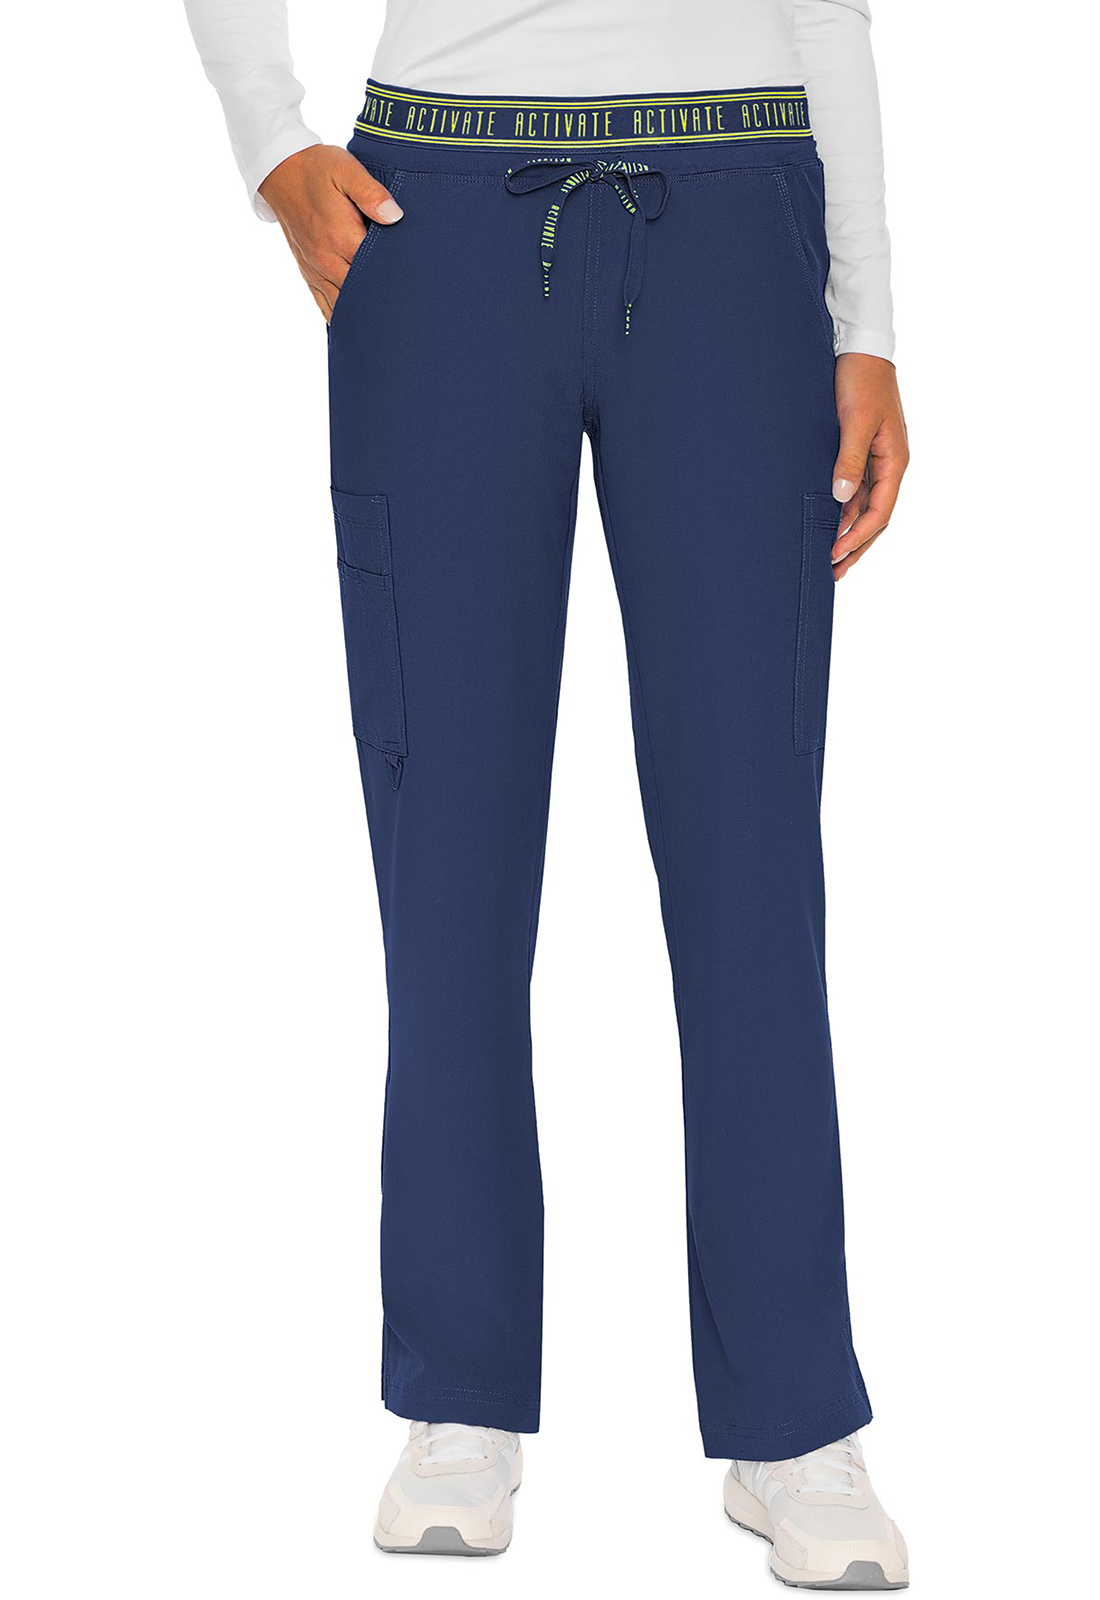 Med Couture MC Activate Yoga 2 Cargo Pocket Pant-Med Couture